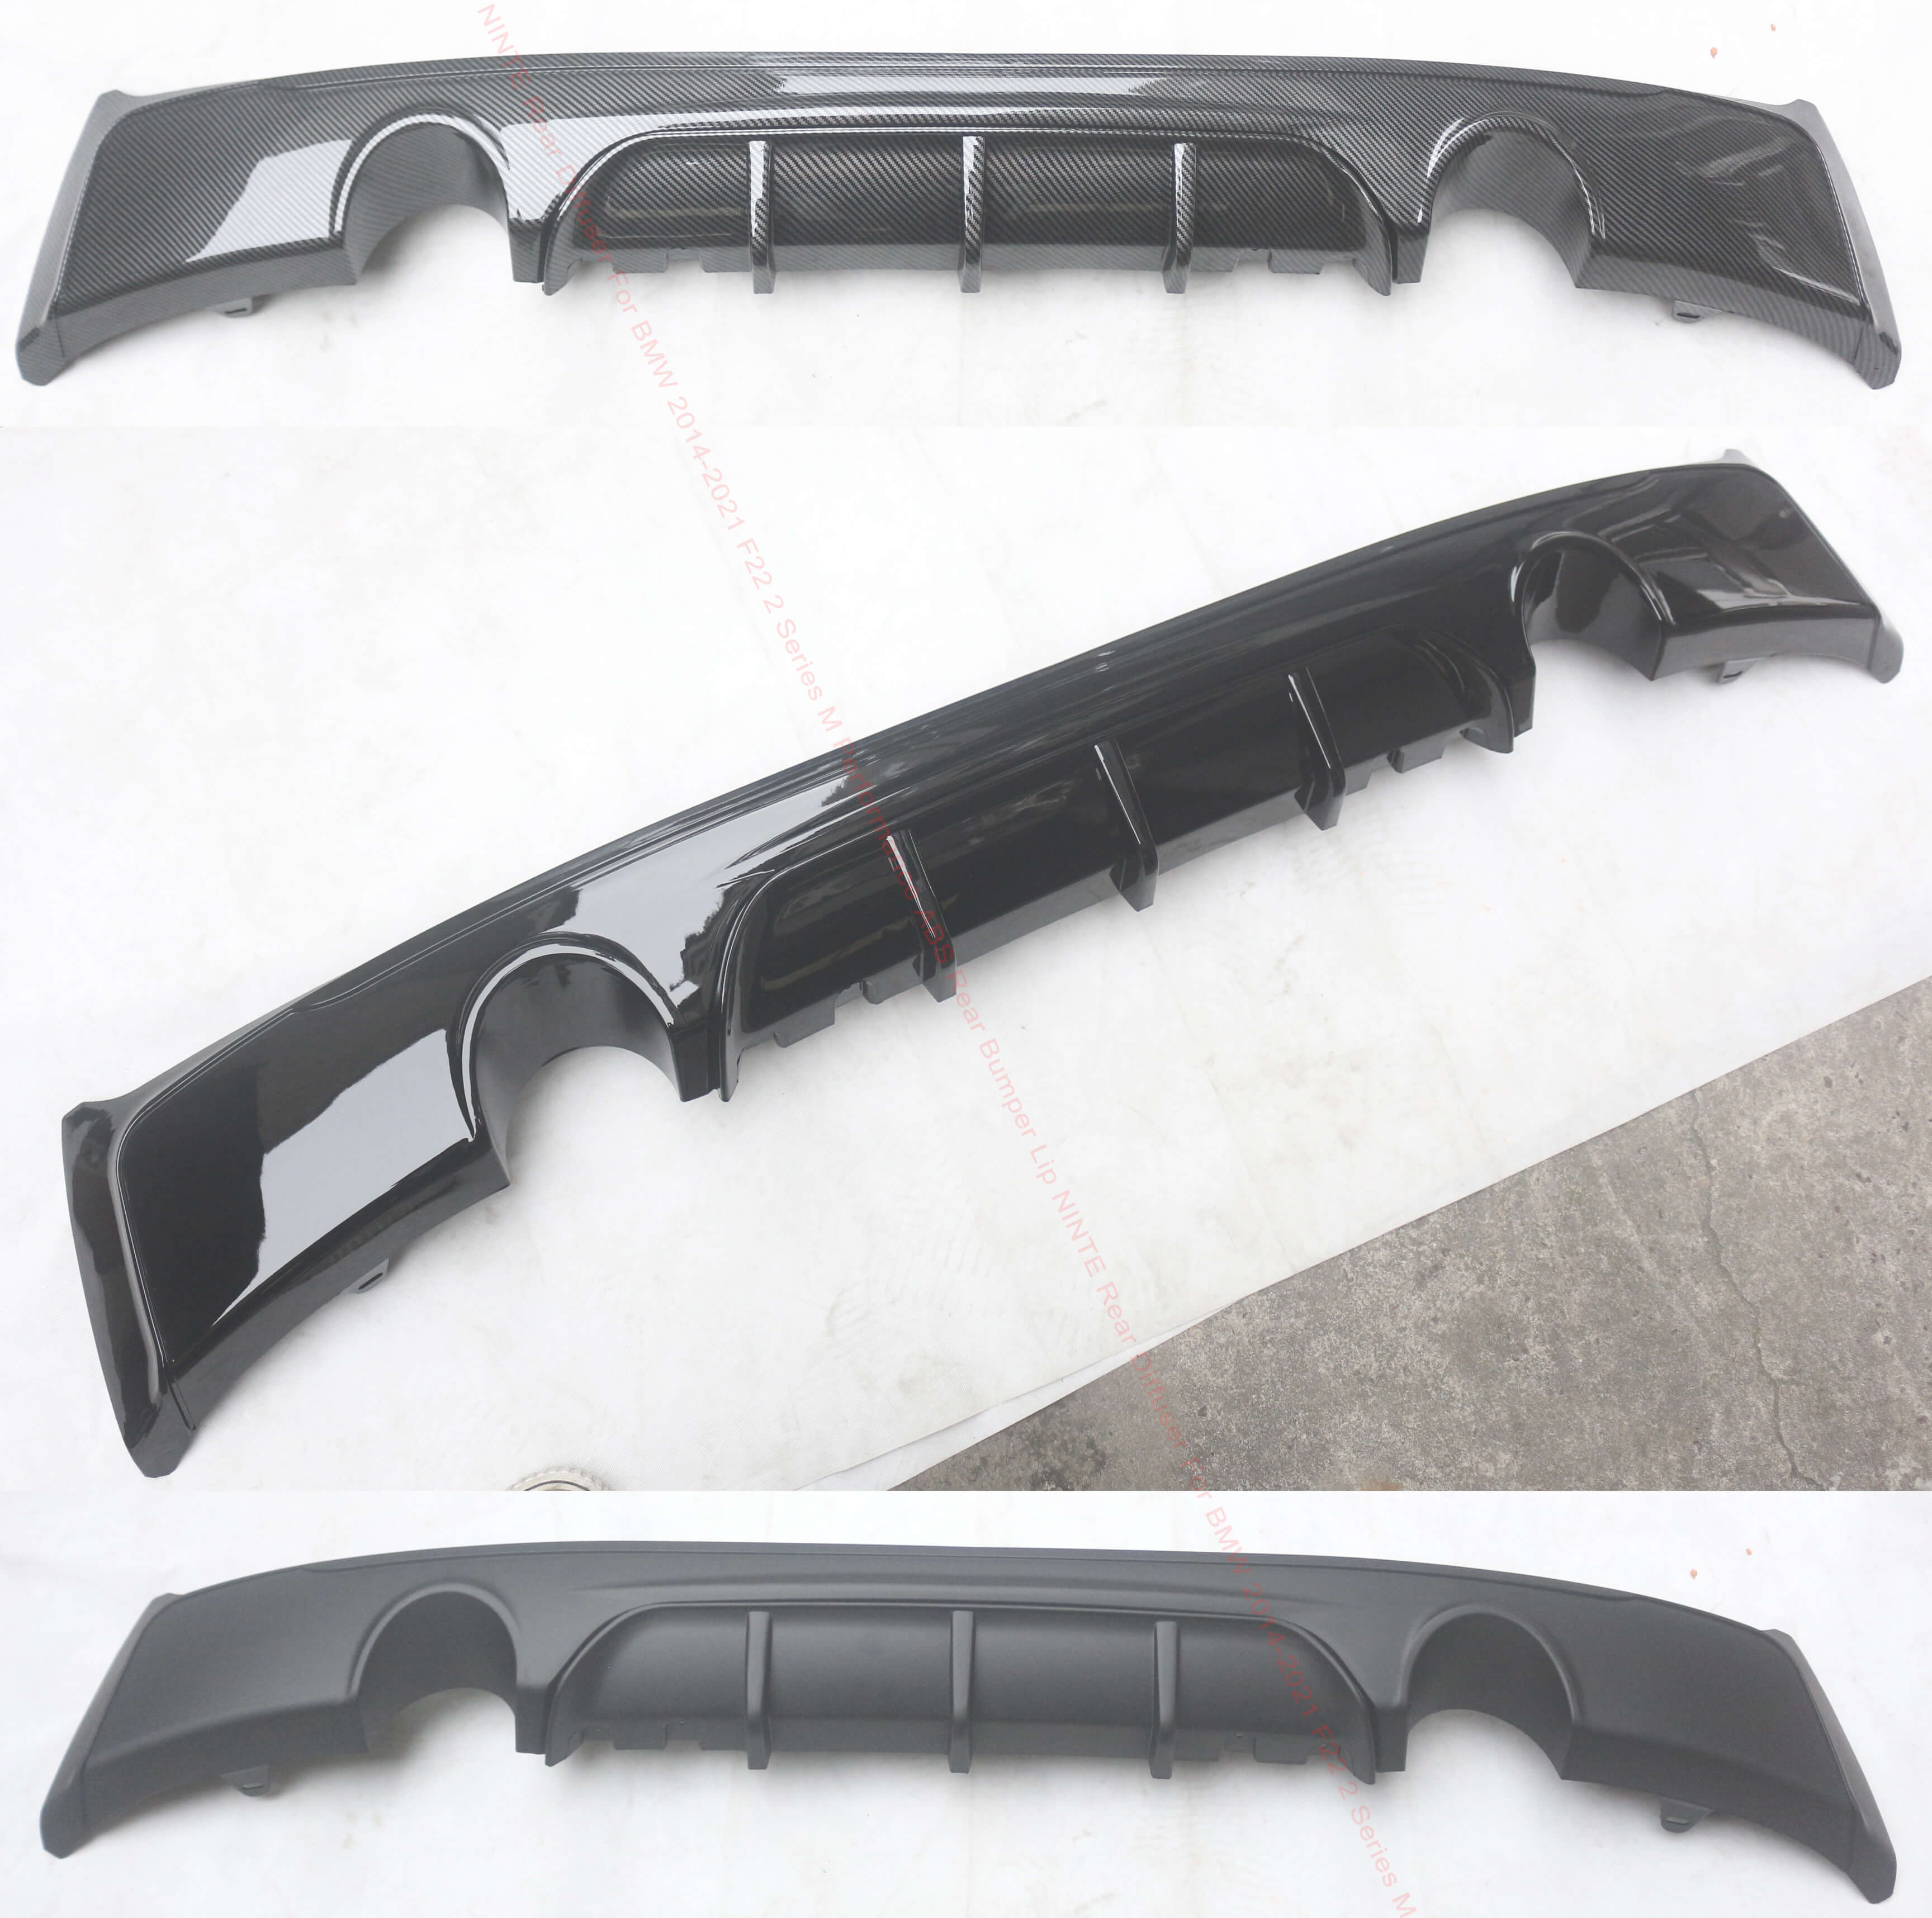 NINTE Rear Diffuser For BMW 2014-2021 F22 2 Series M Performance ABS